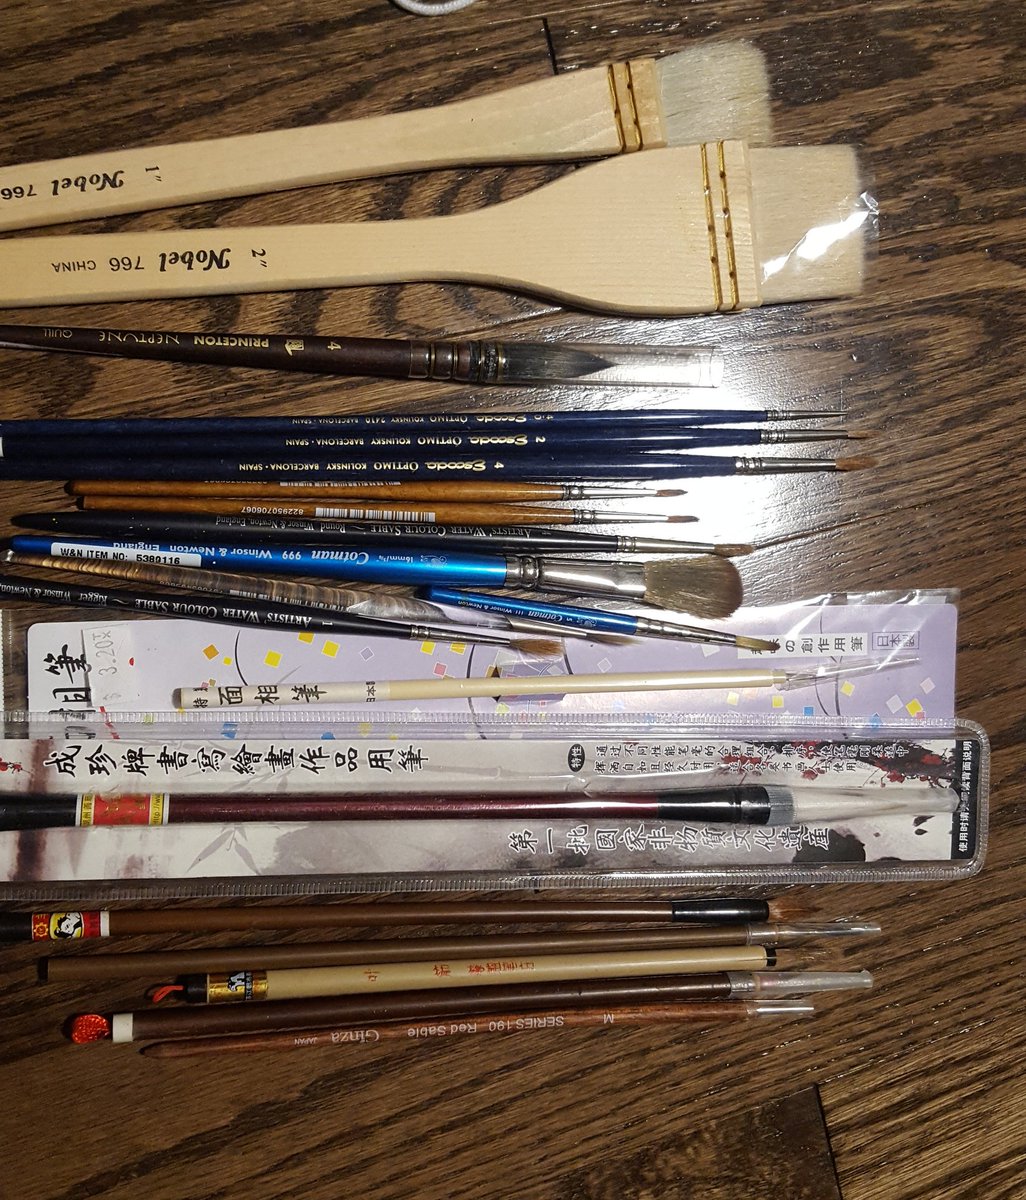 *sale post*
A: arches blocks (1 full, 12shts in square) 30usd
B: synthetic oil/acrylic brushes mostly new, 4 lightly used, brush wrap, brush box 60usd
C: bag of 20+ new student nylon brushes 15usd
D:bunch of new/ lightly used water brushes 30usd

shipping 15usd (CAN /US only) 